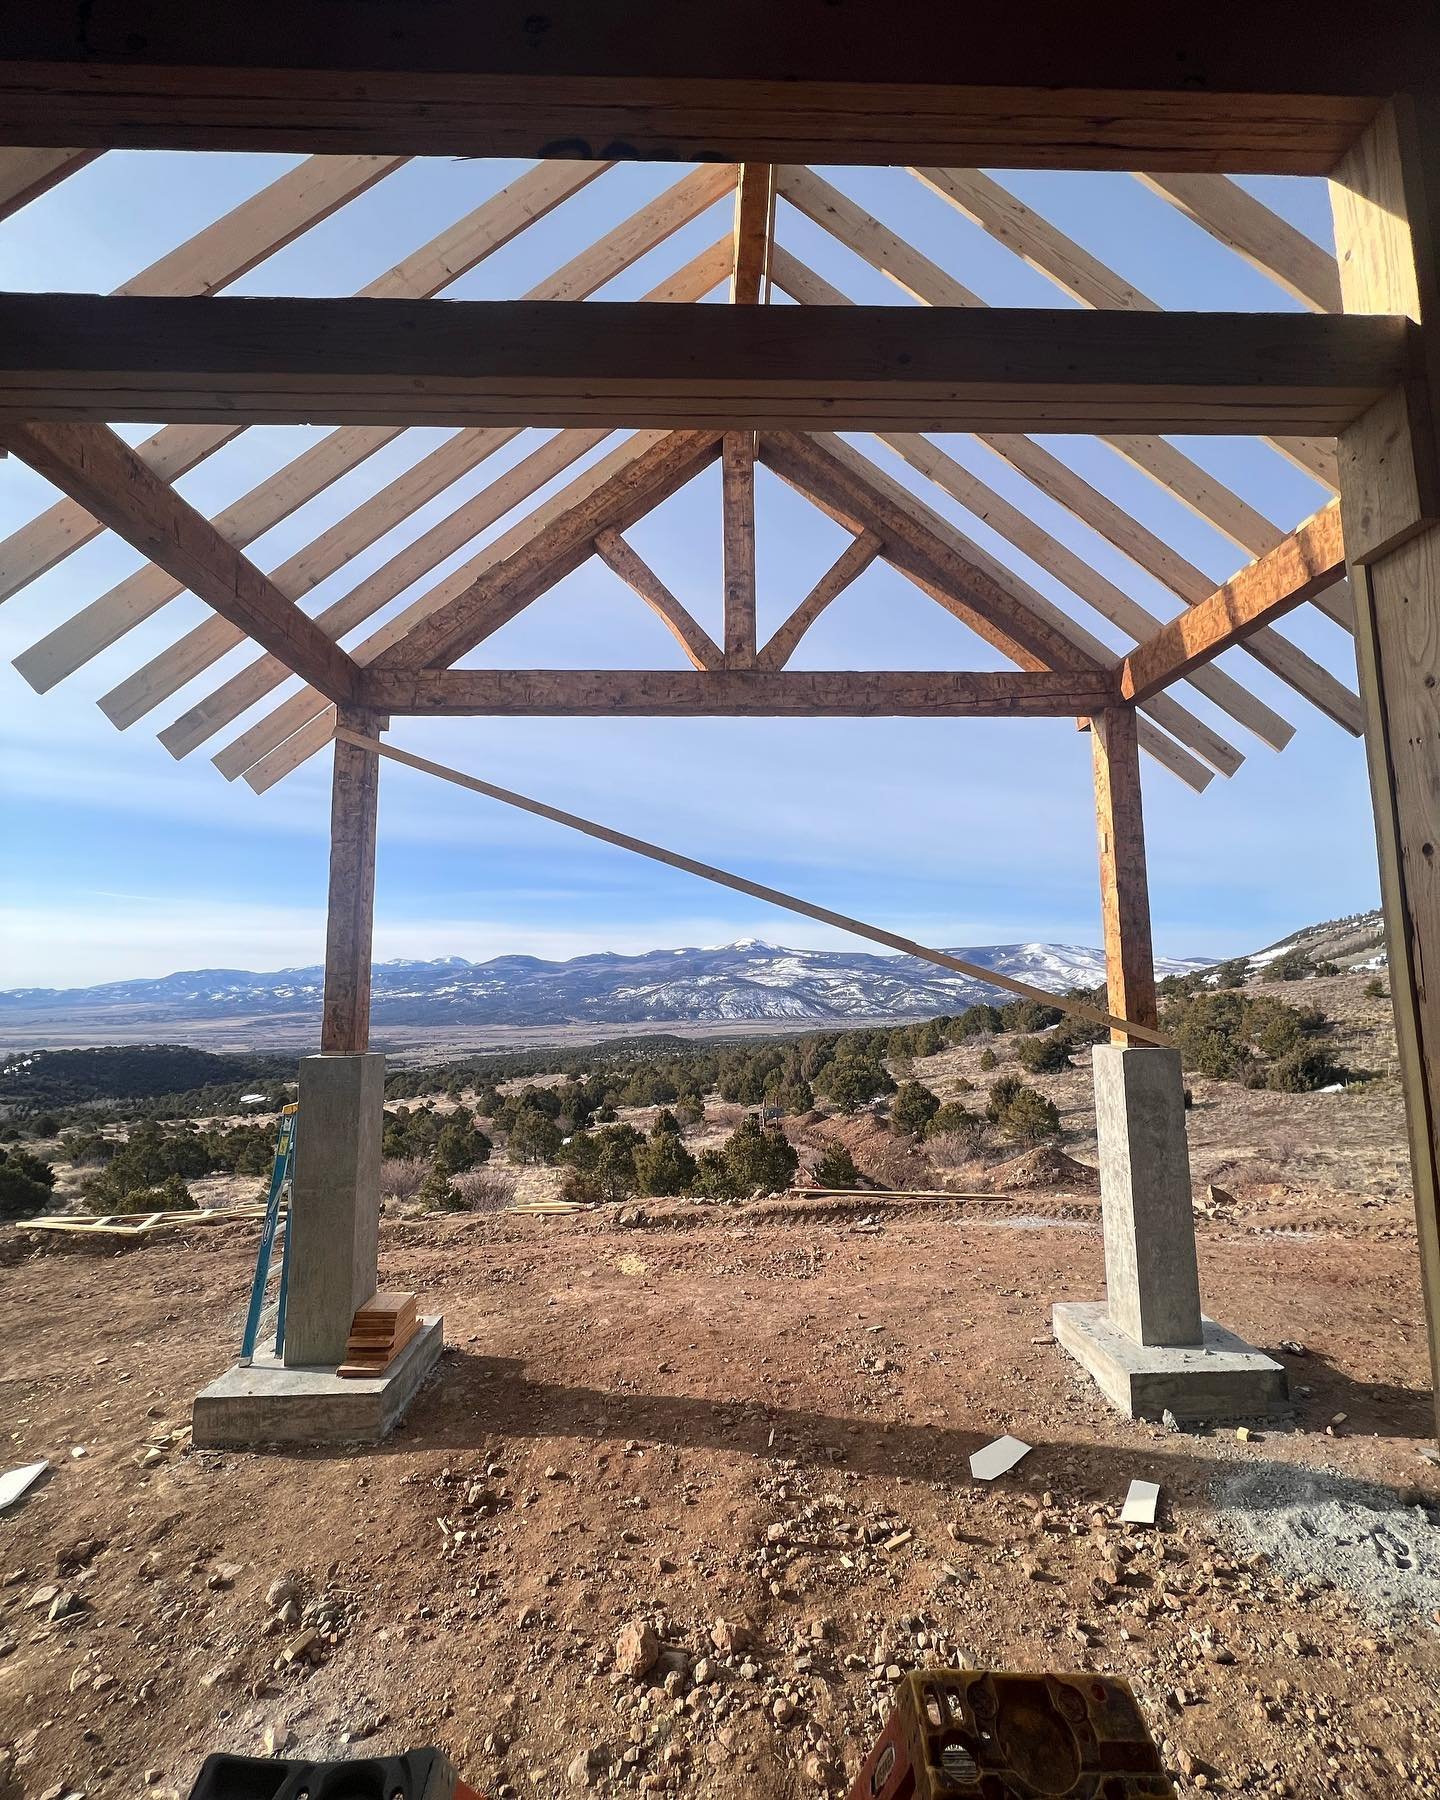 This has been a fun and interesting framing job. We&rsquo;ll be wrapping it up this week. 

#southforkcolorado #framing